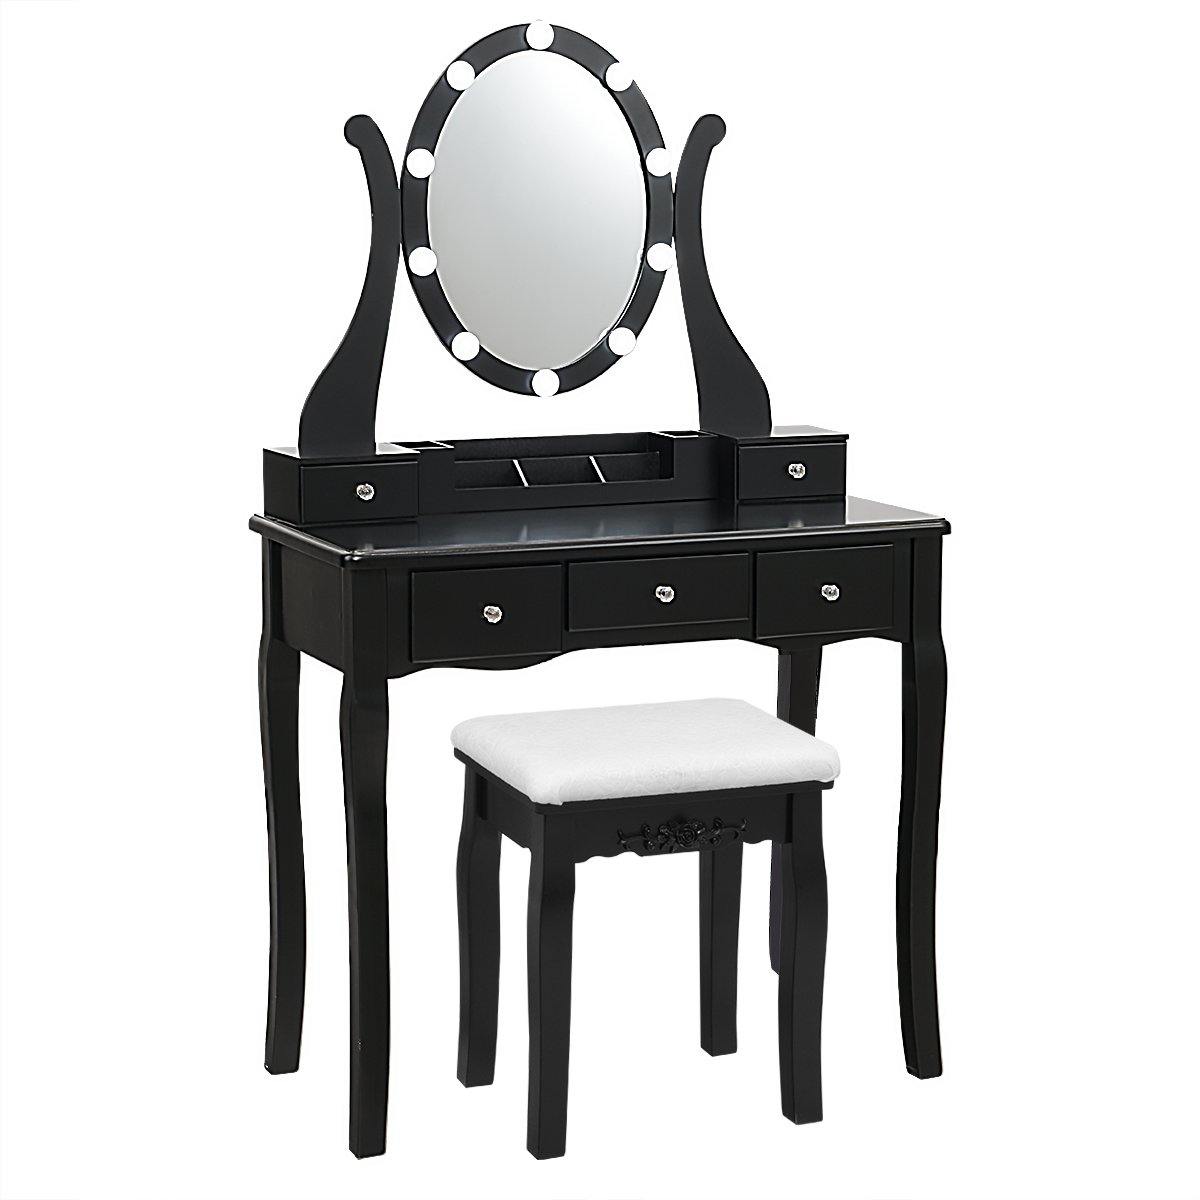 CHARMAID | Vanity Table Set with Lighted Mirror, Makeup Dressing Table with 10 LED Lights, Touch Switch, 5 Drawers - Giantexus